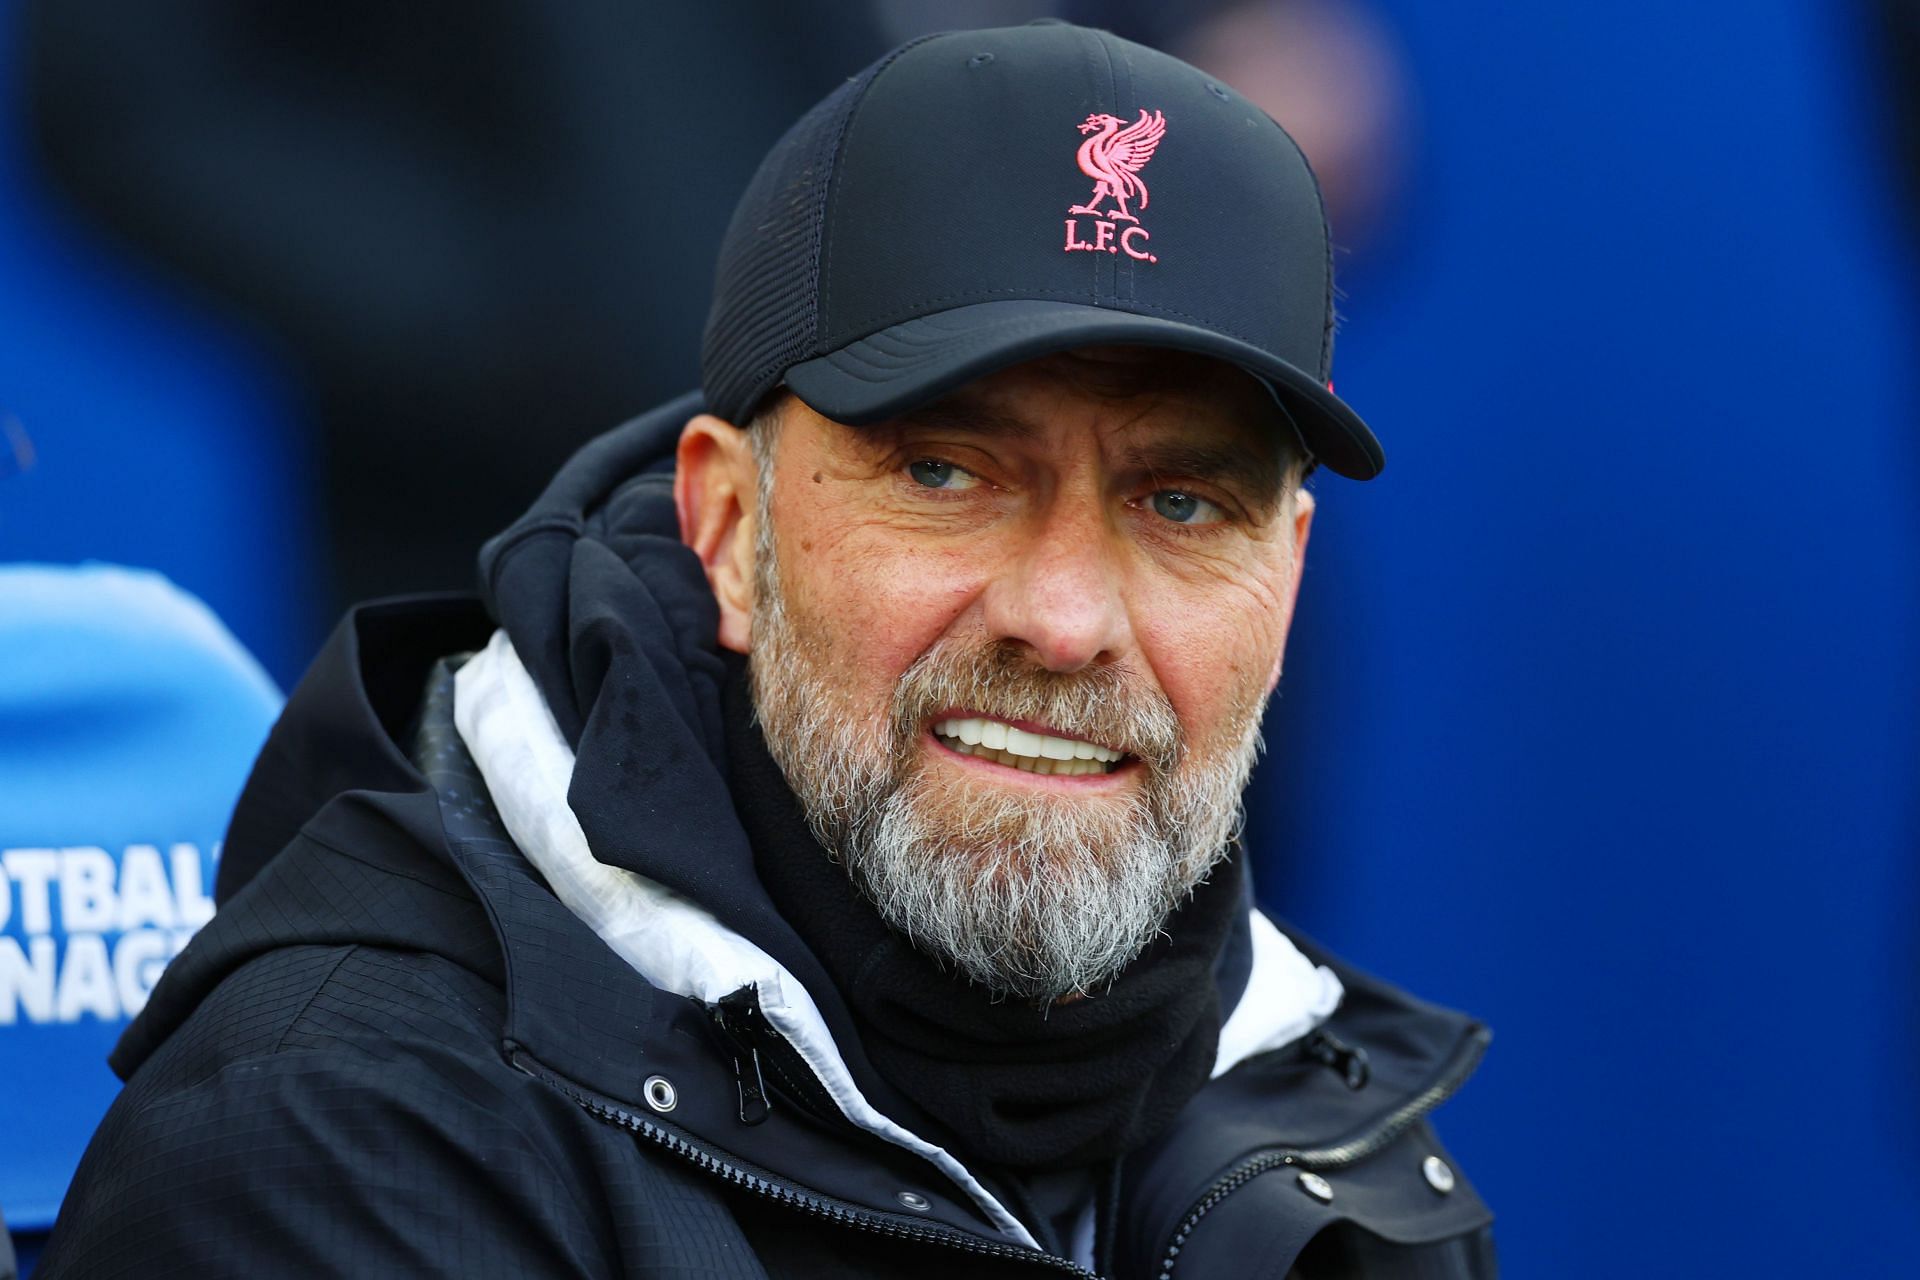 Jurgen Klopp will be hoping to guide the Reds to victory against Wolves.